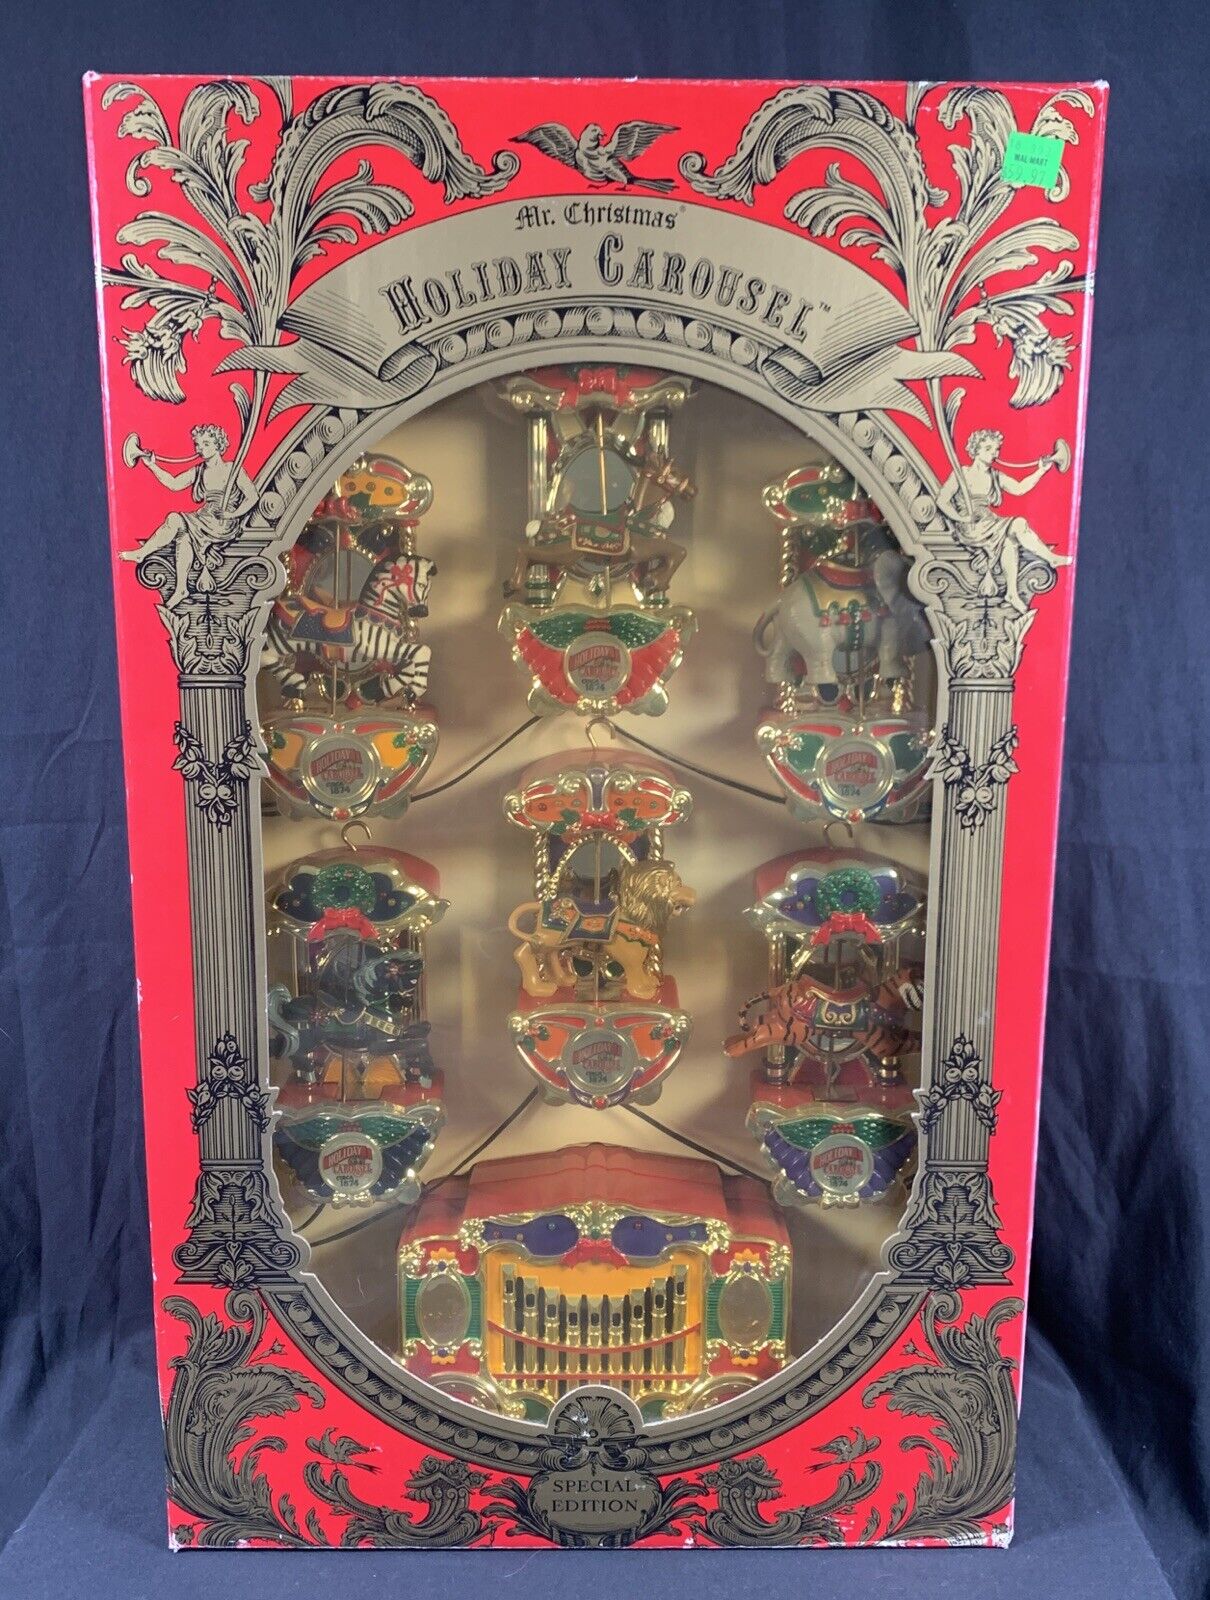 ✨Vintage Mr. Christmas Holiday Carousel Special Edition 1992 EUC IN BOX✨